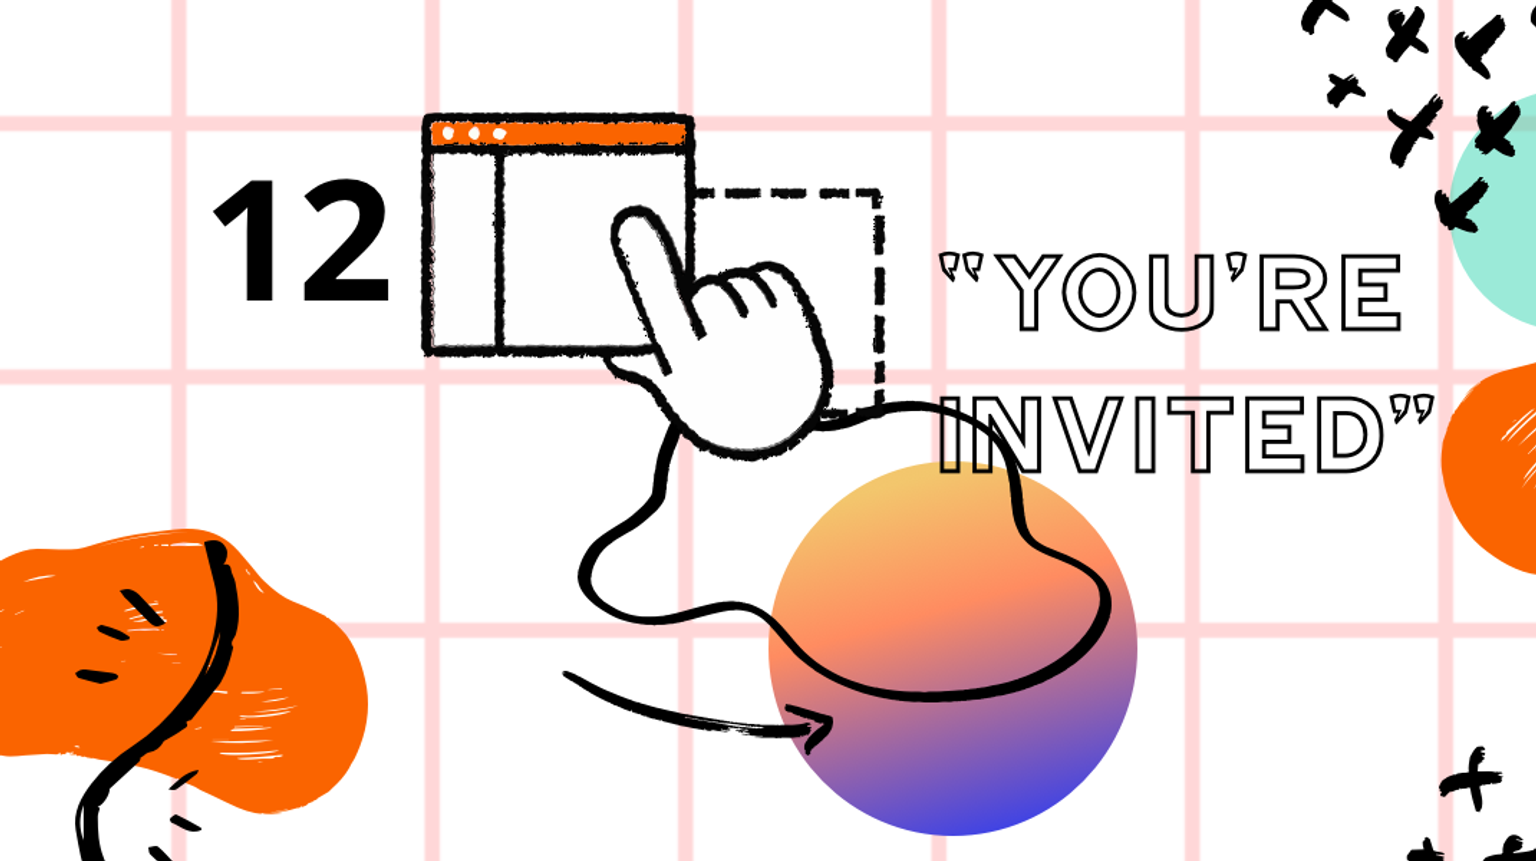 Creating An Event Invitation Campaign